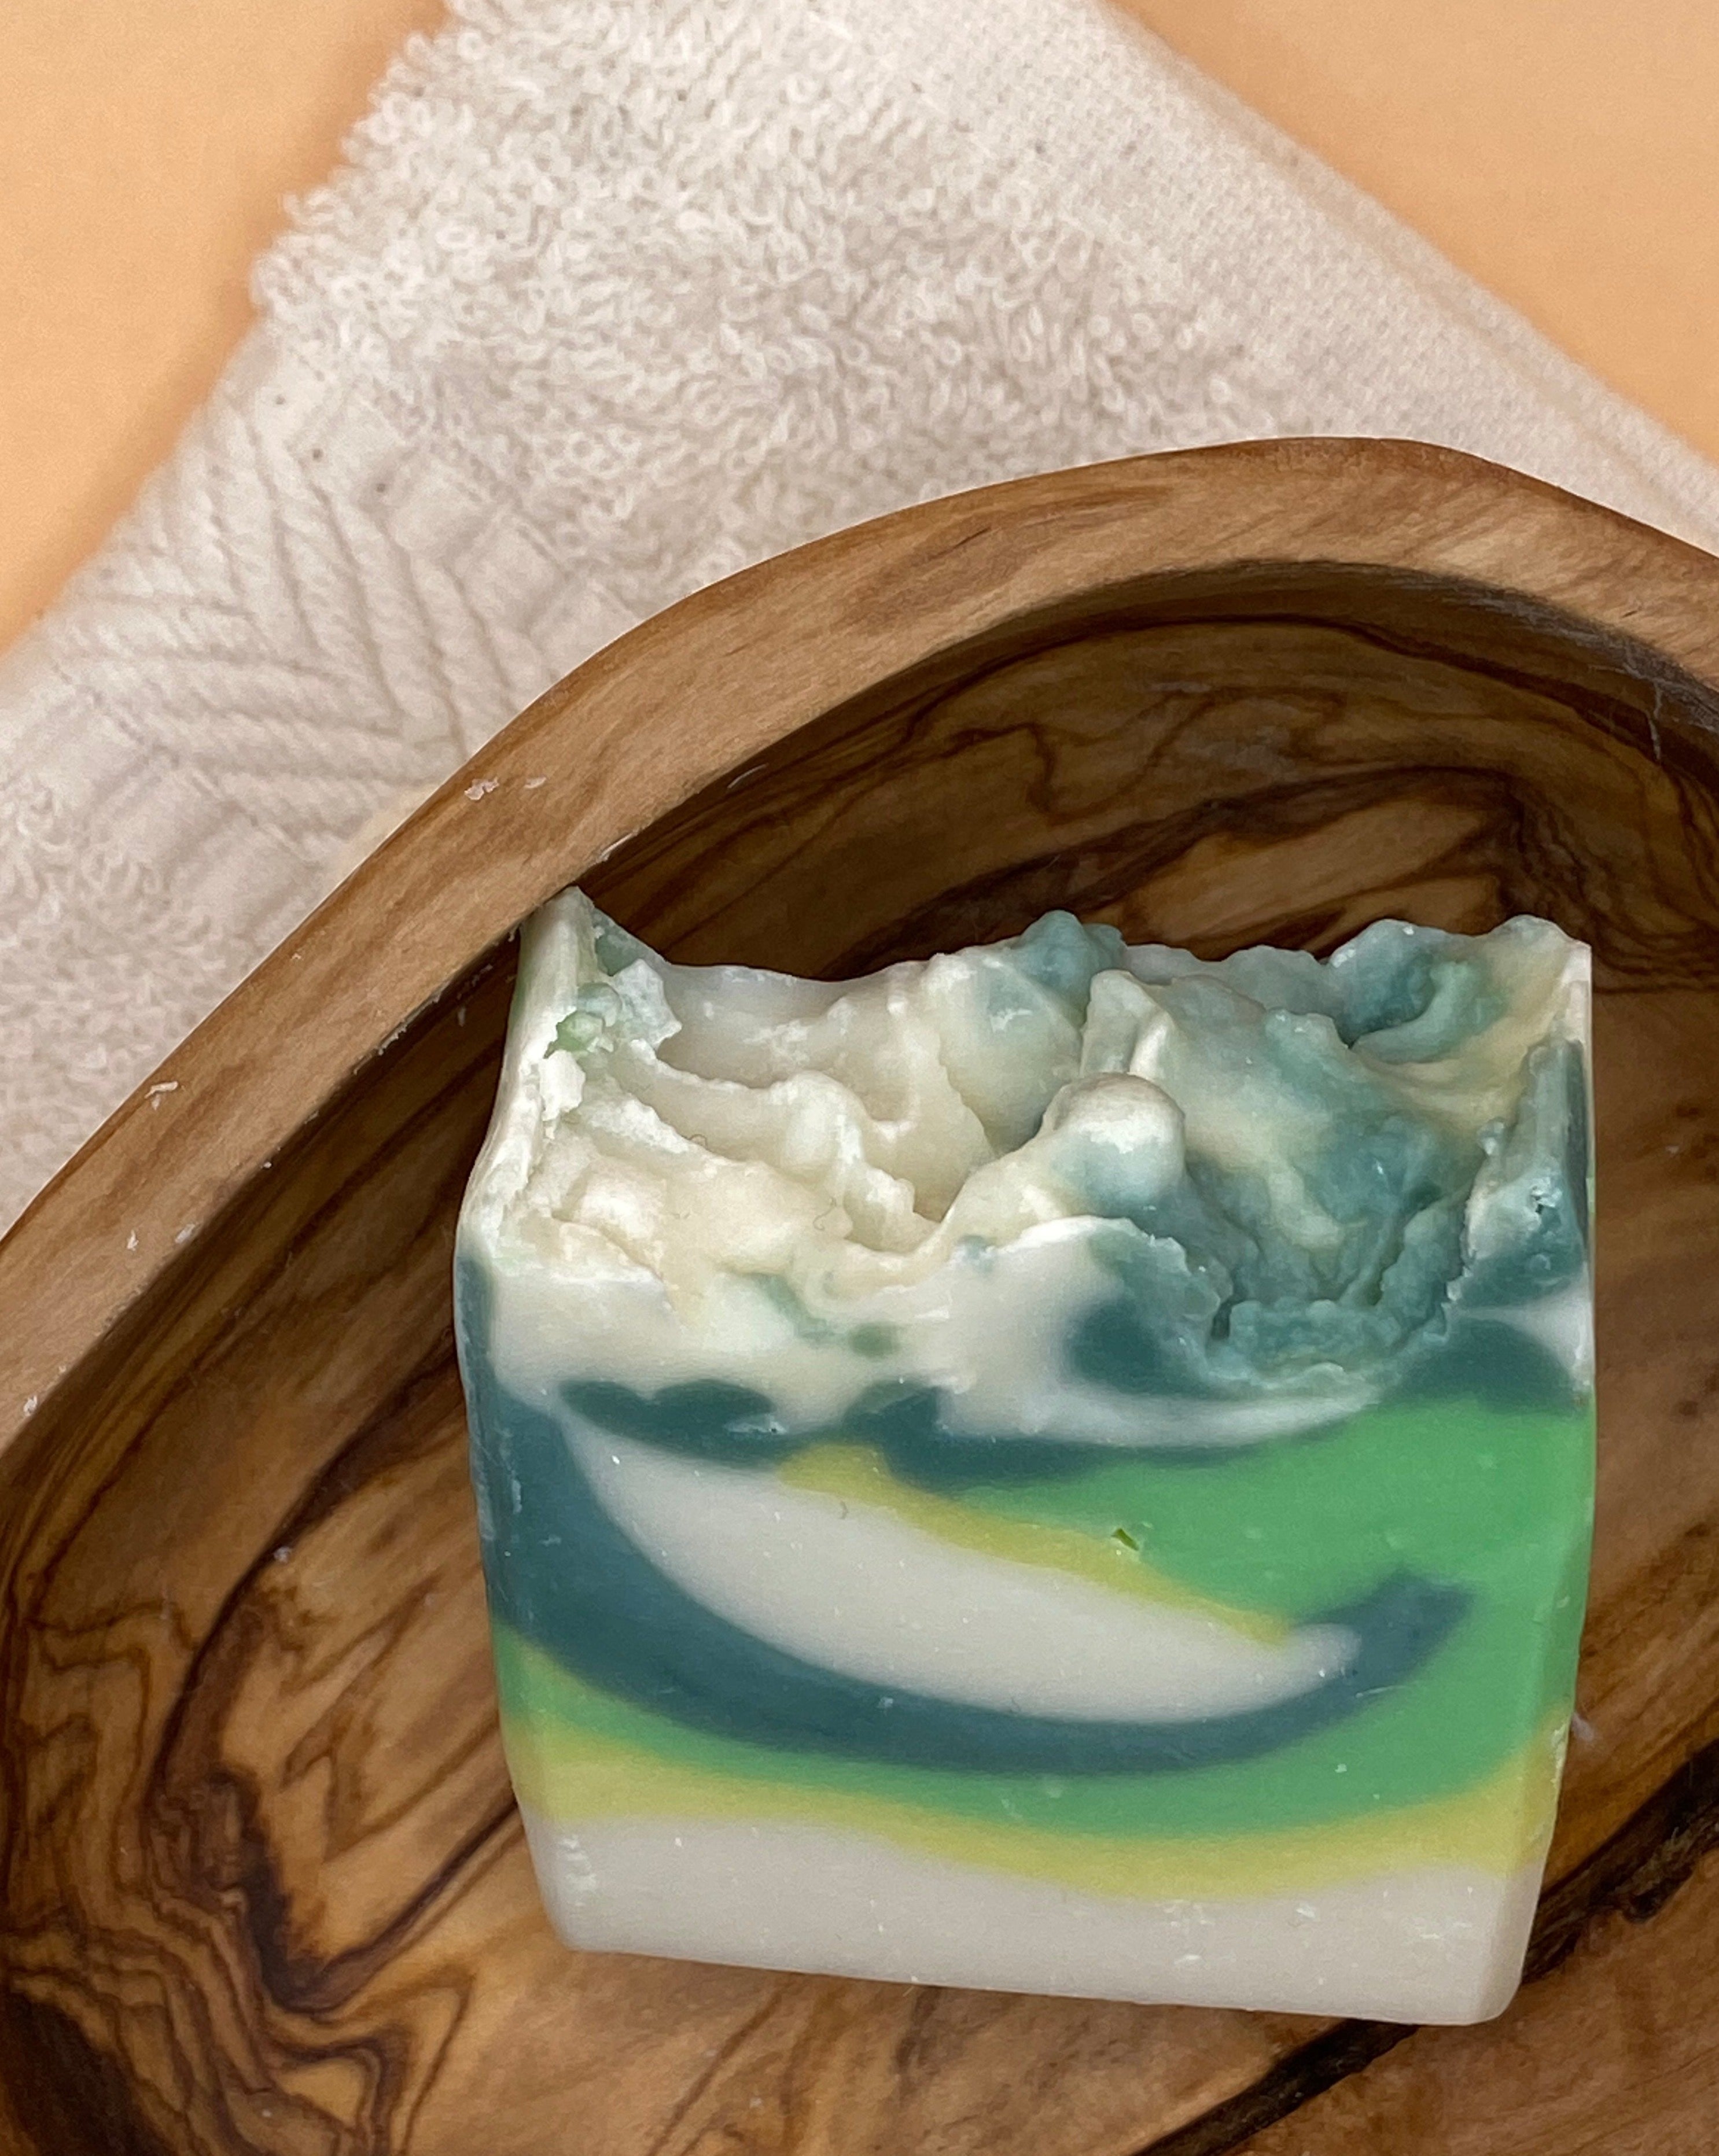 Ginkgo-Limette Soap in a olive wood soap disch.